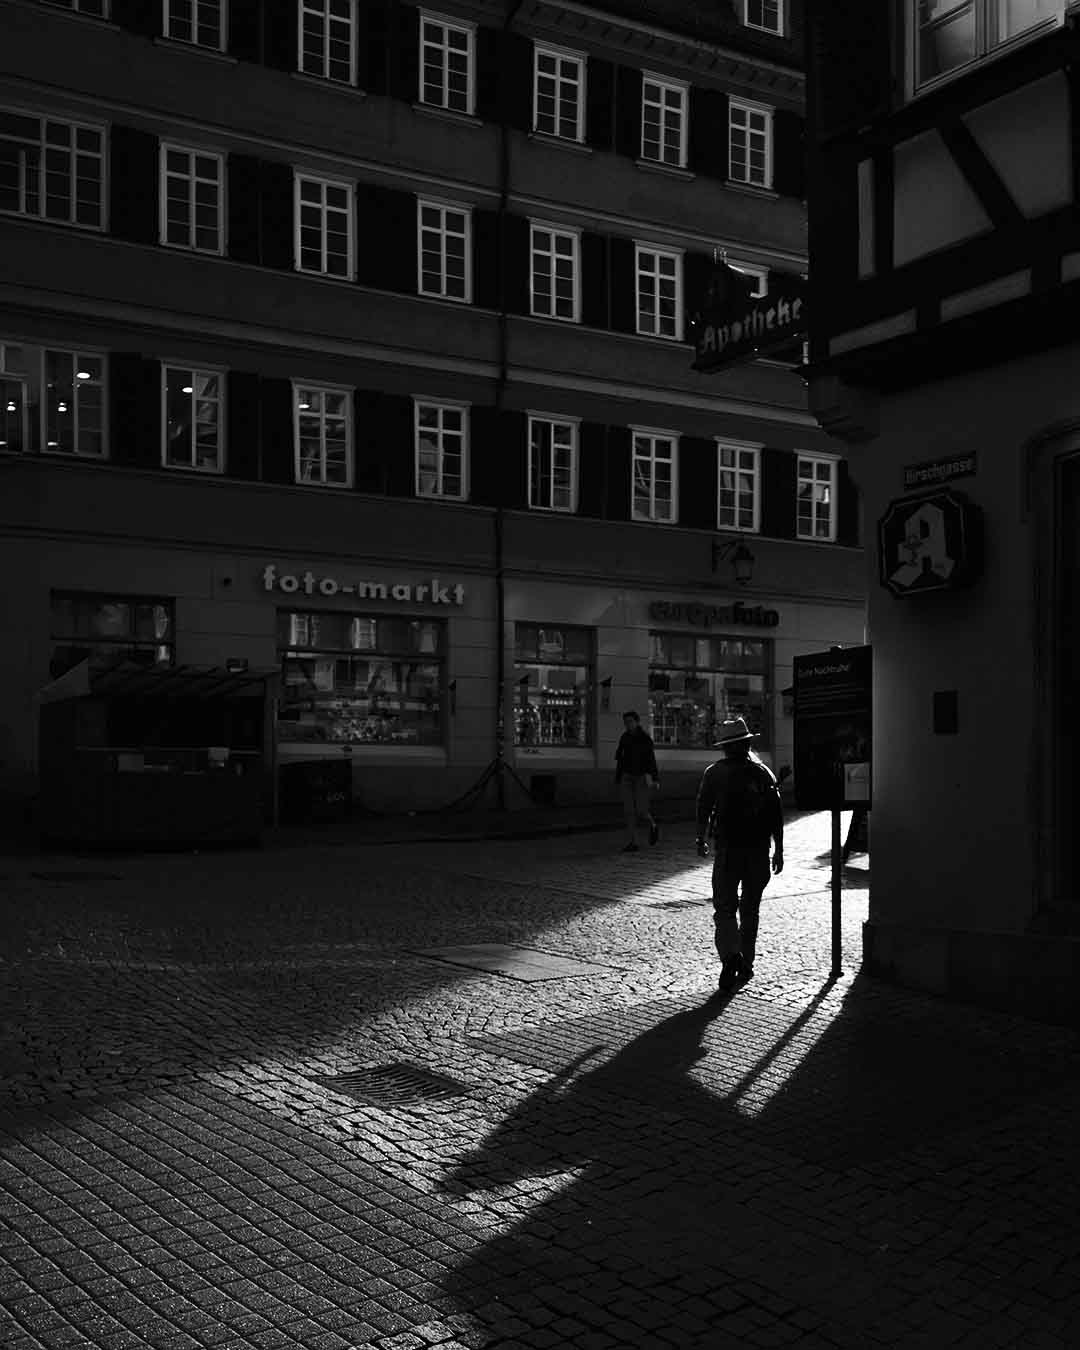 Street photograph in Tübingen in Germany, at down, people in the old city